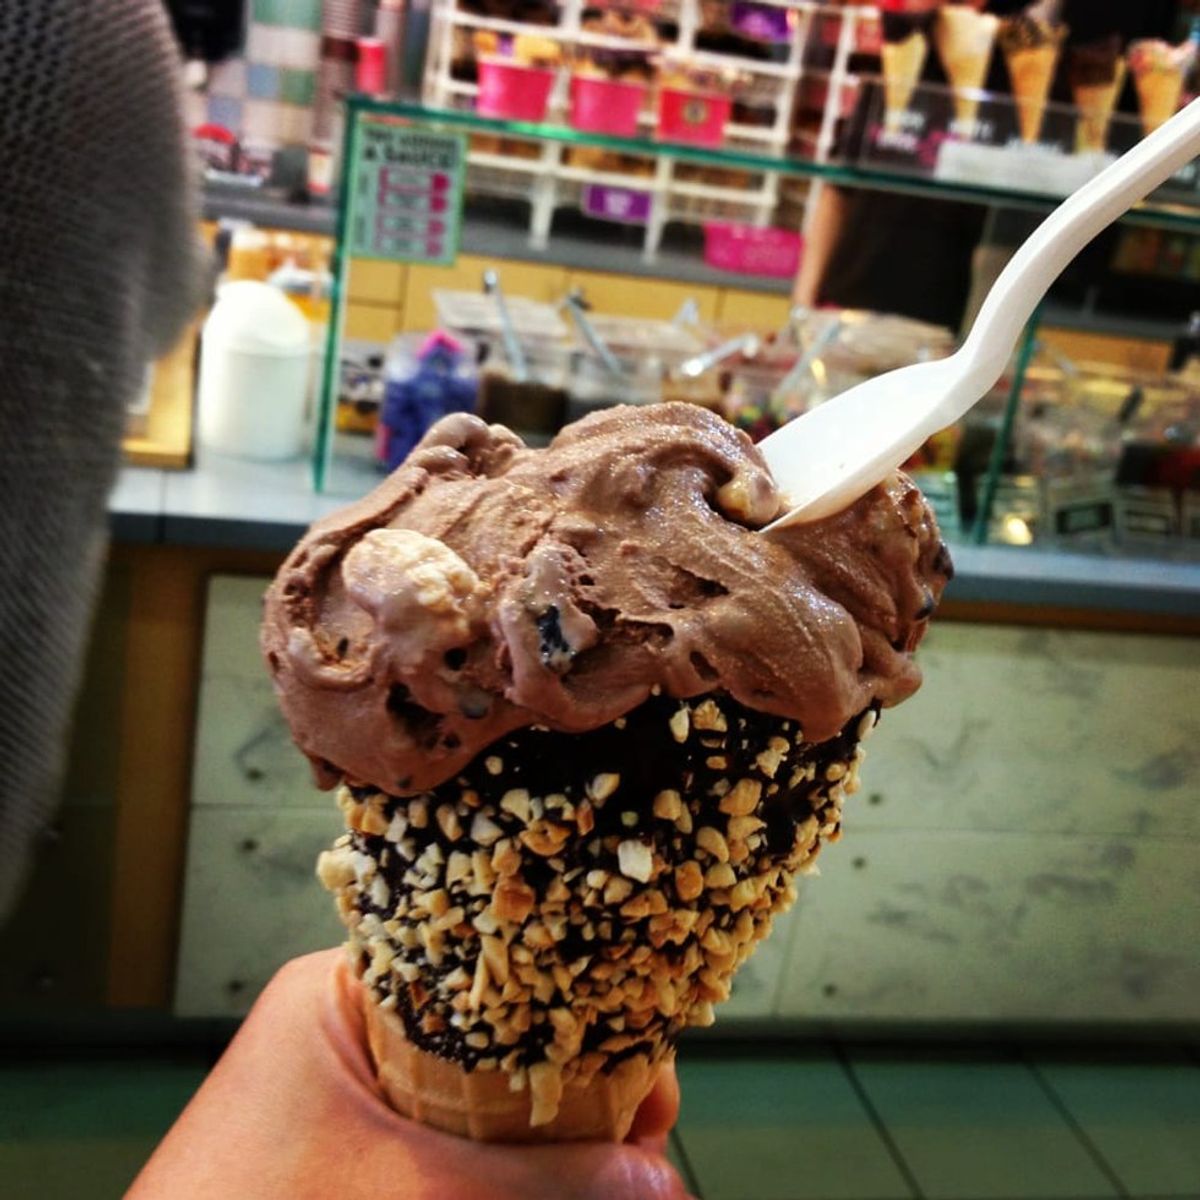 9 Marble Slab Ice Cream Creations To Die For